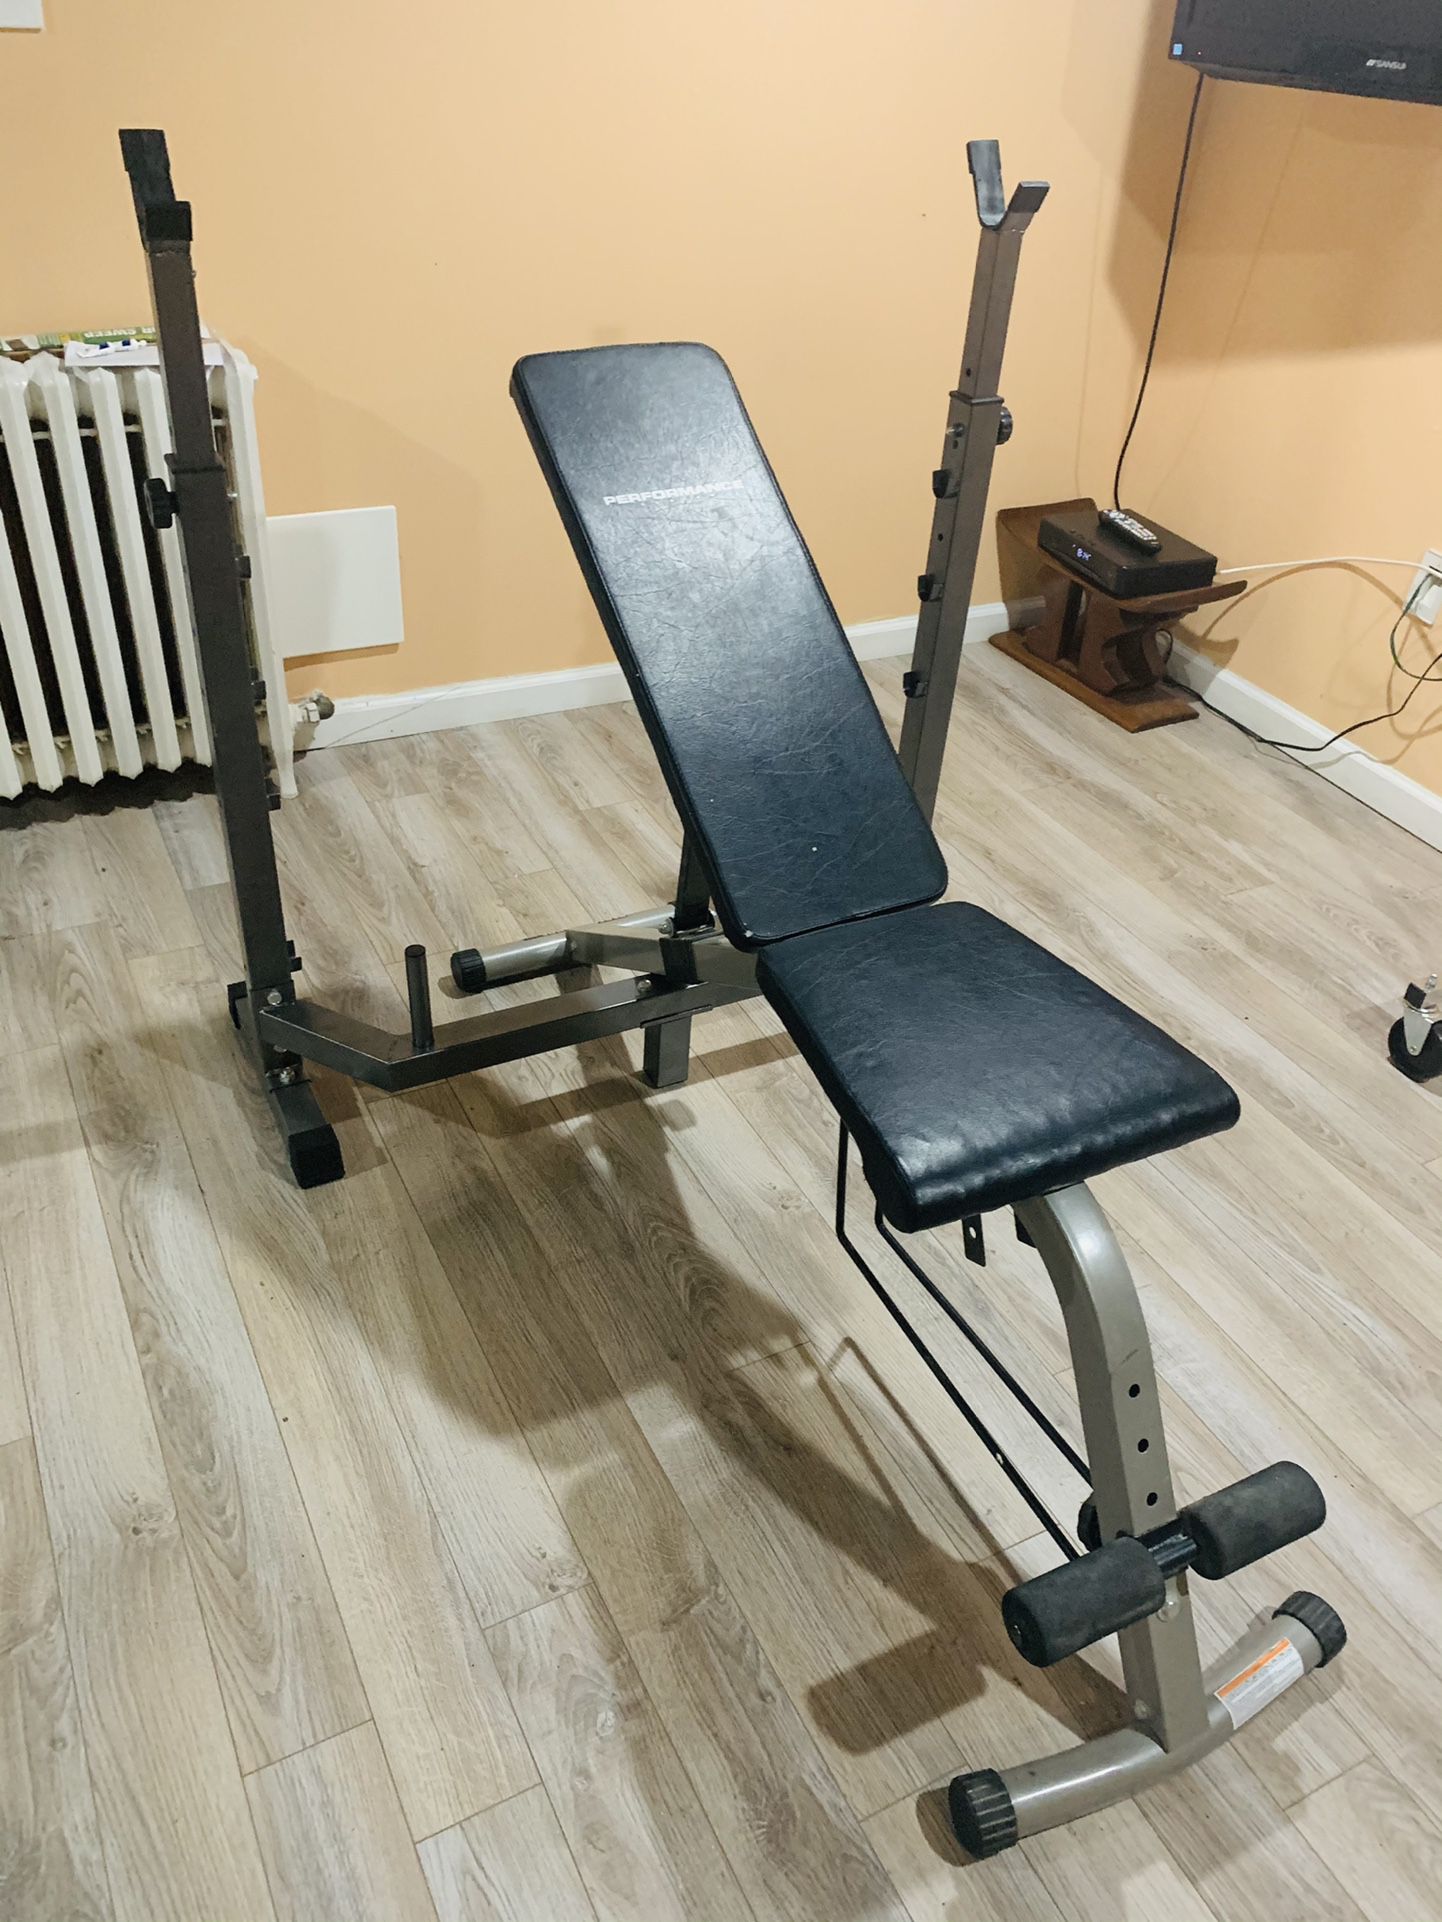 Olympic Weight Bar Rack and Adjustable Bench